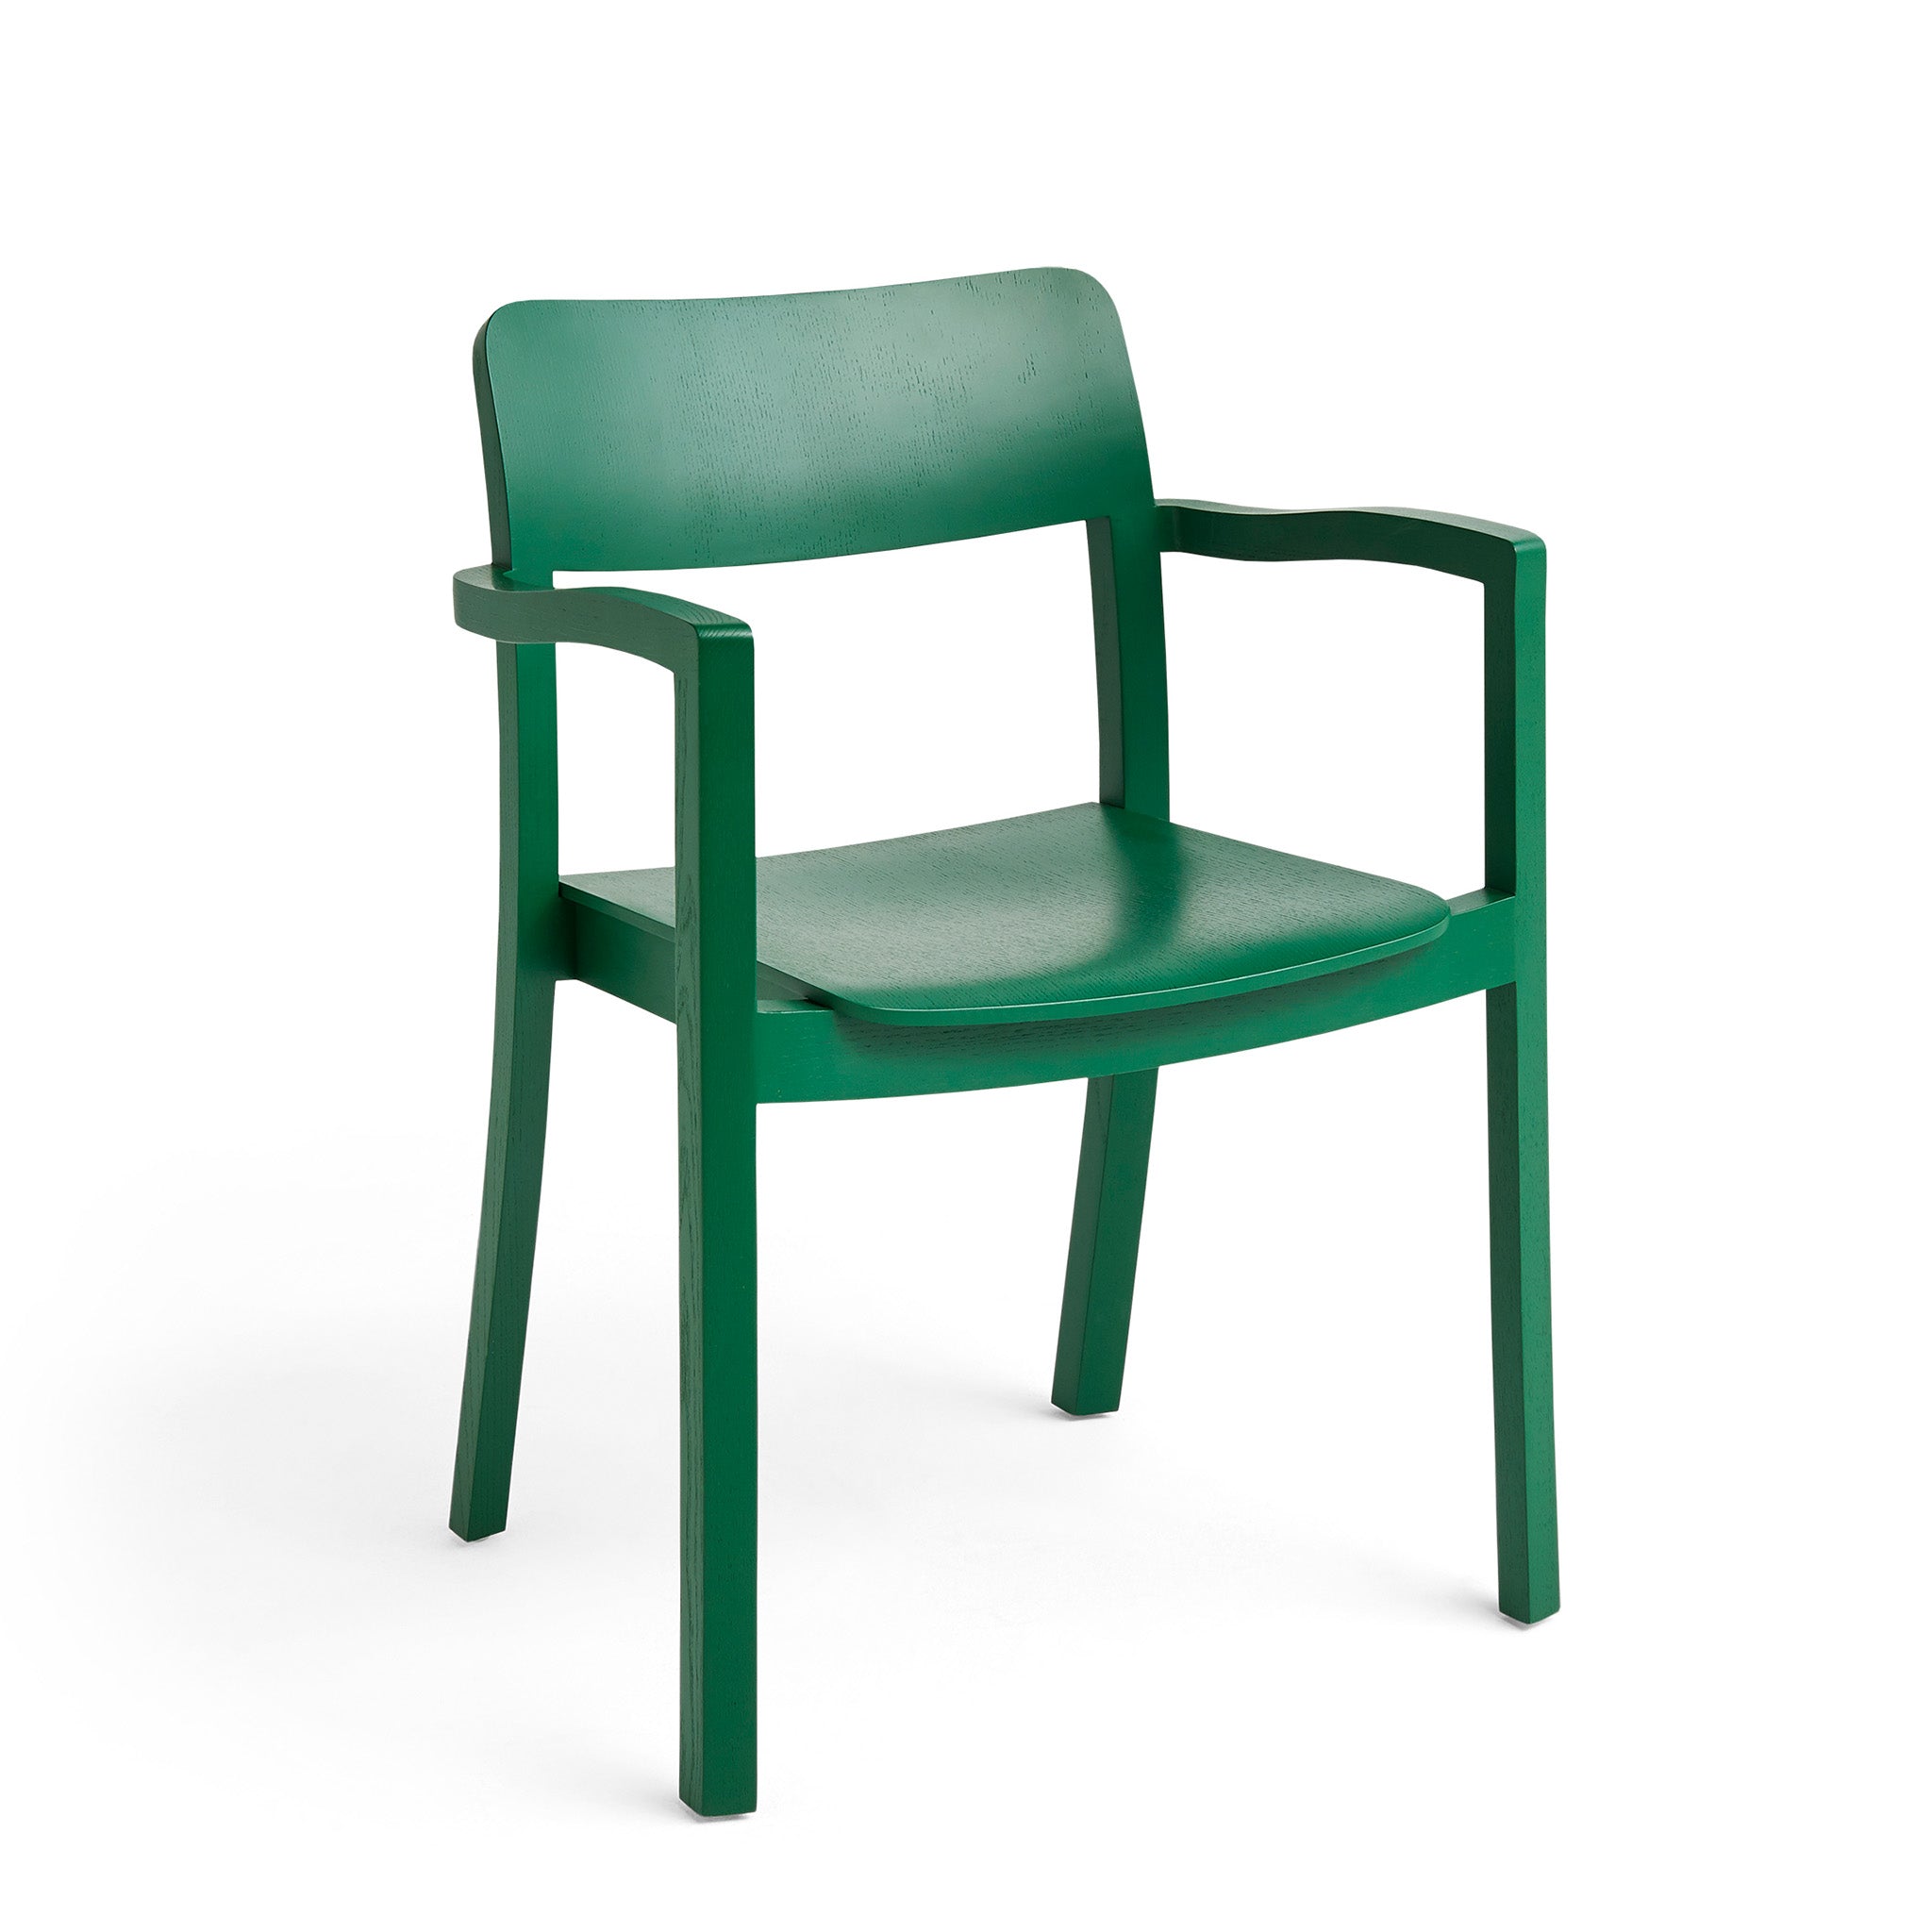 Clearance Pastis Armchair / Pine Green Lacquer by Julien Renault for Hay